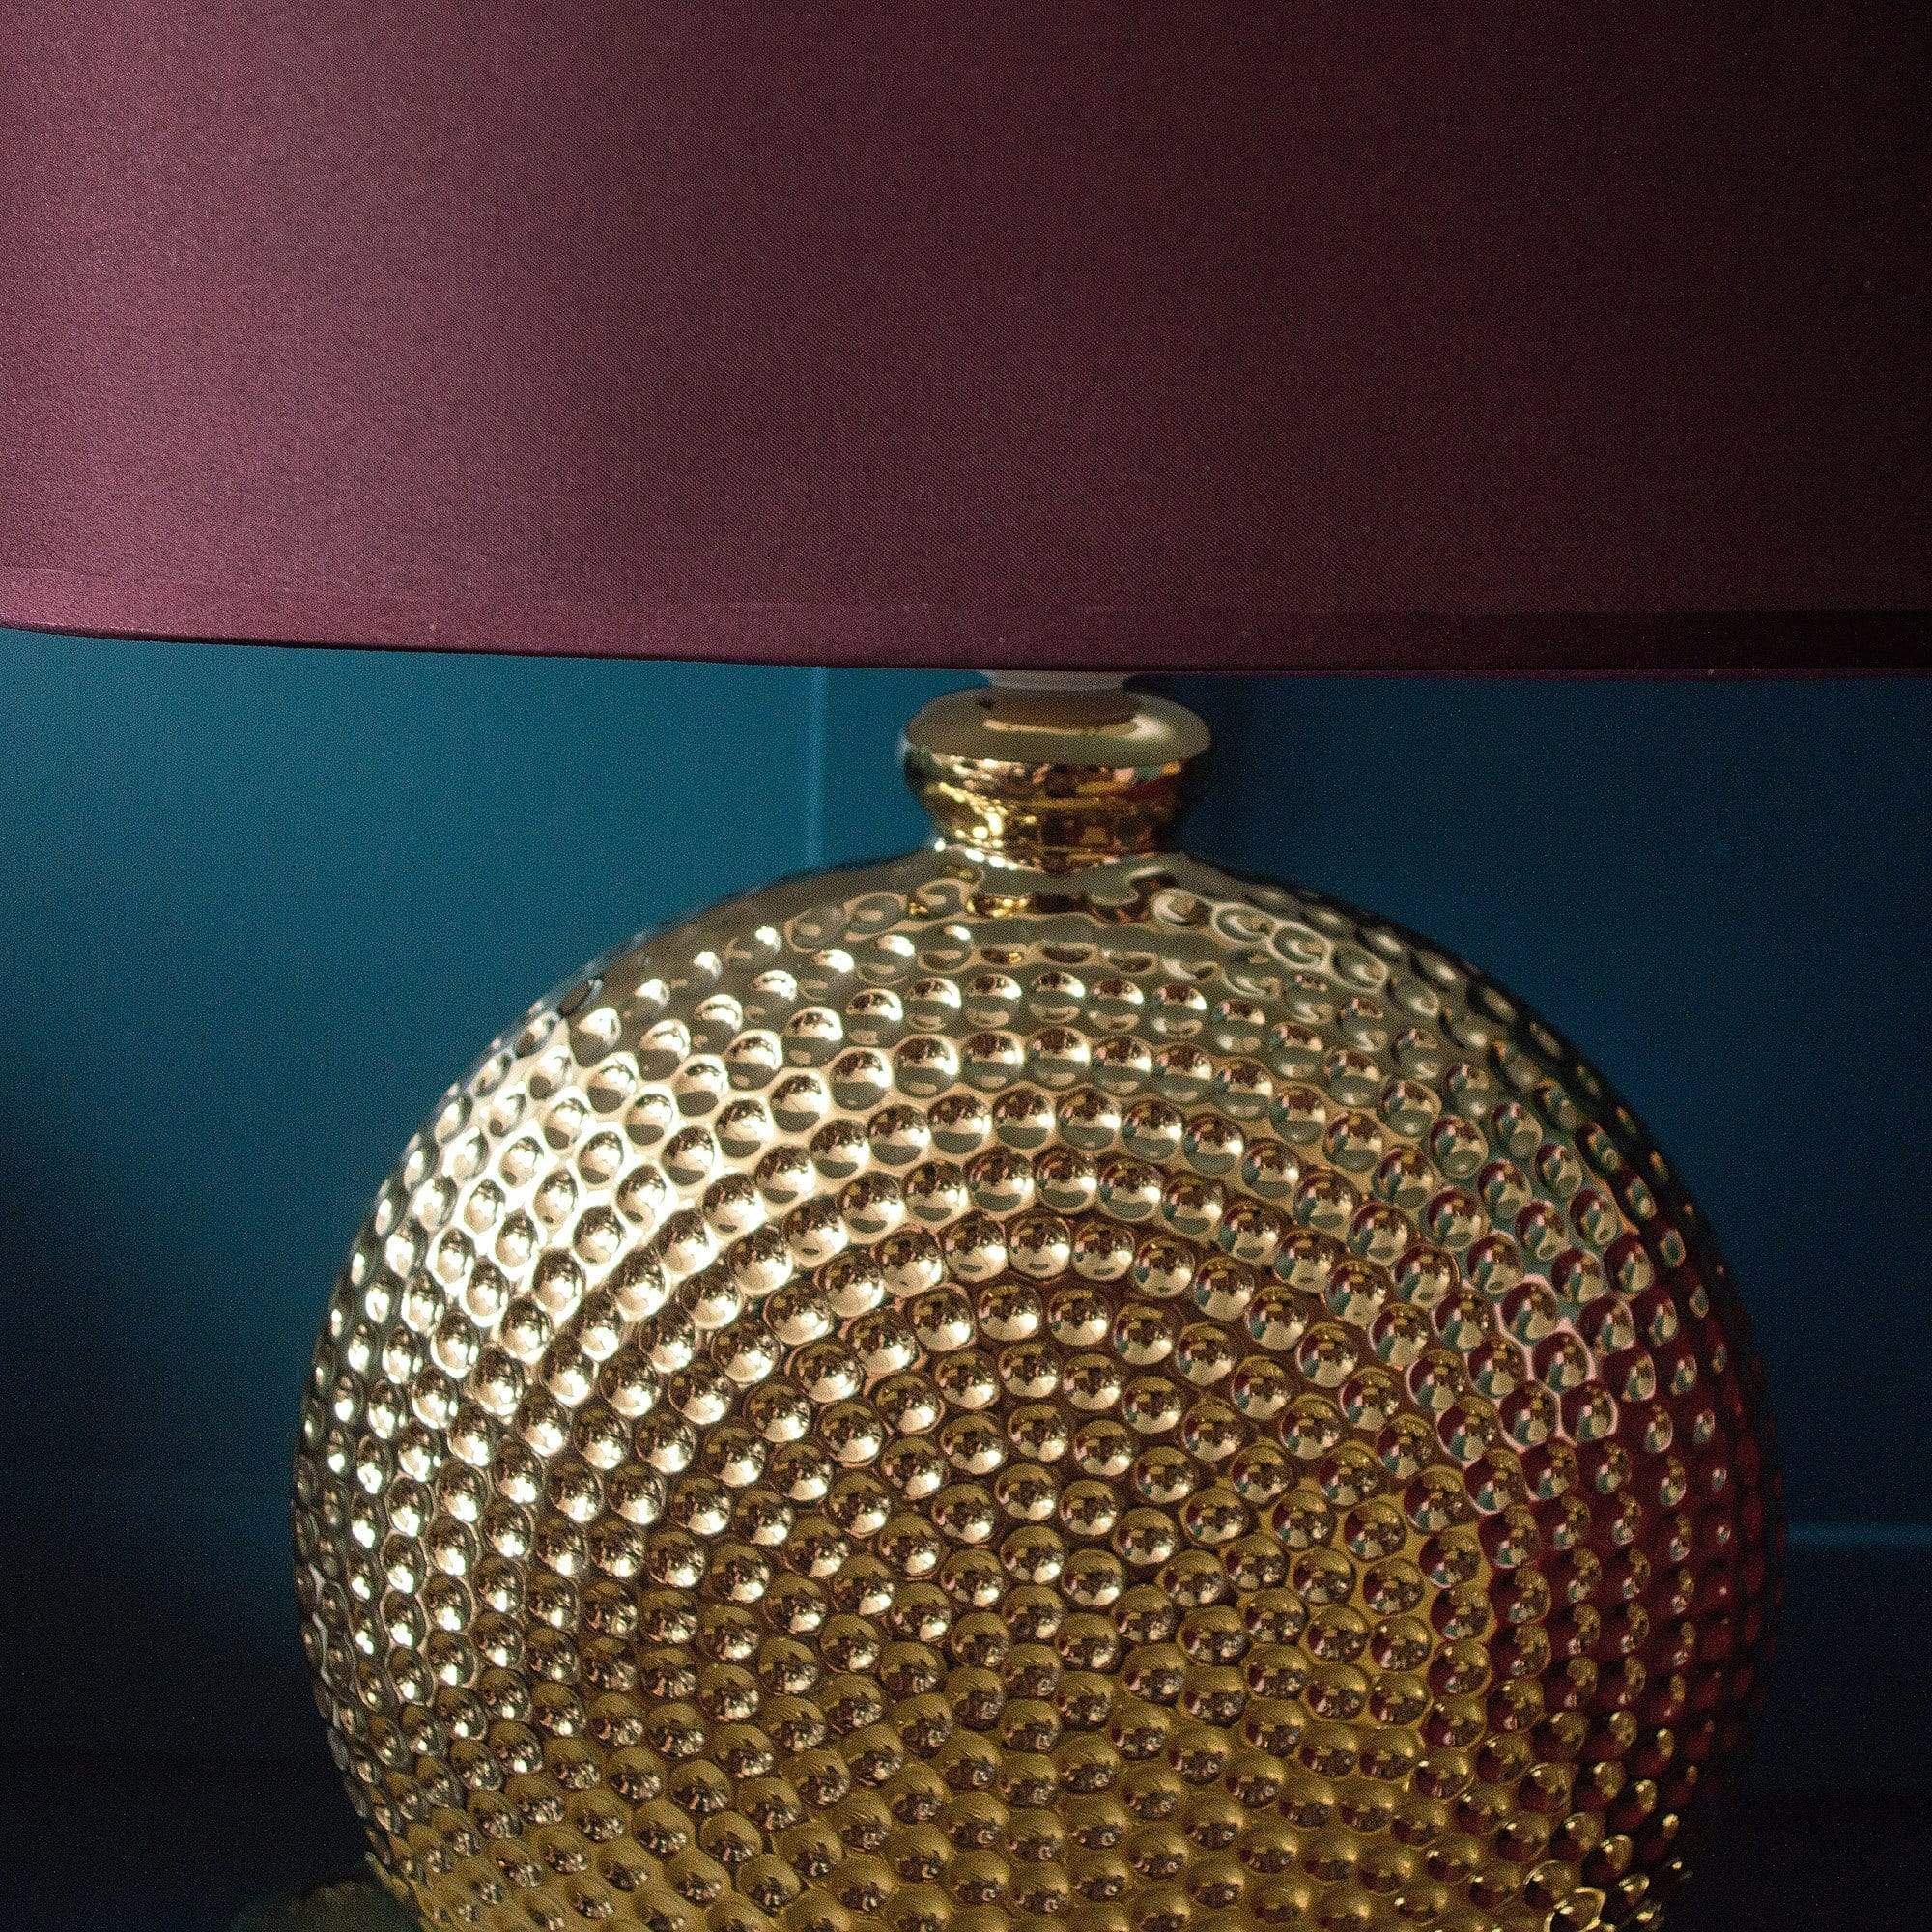 Hammered Gold Table Lamp with Burgundy Shade